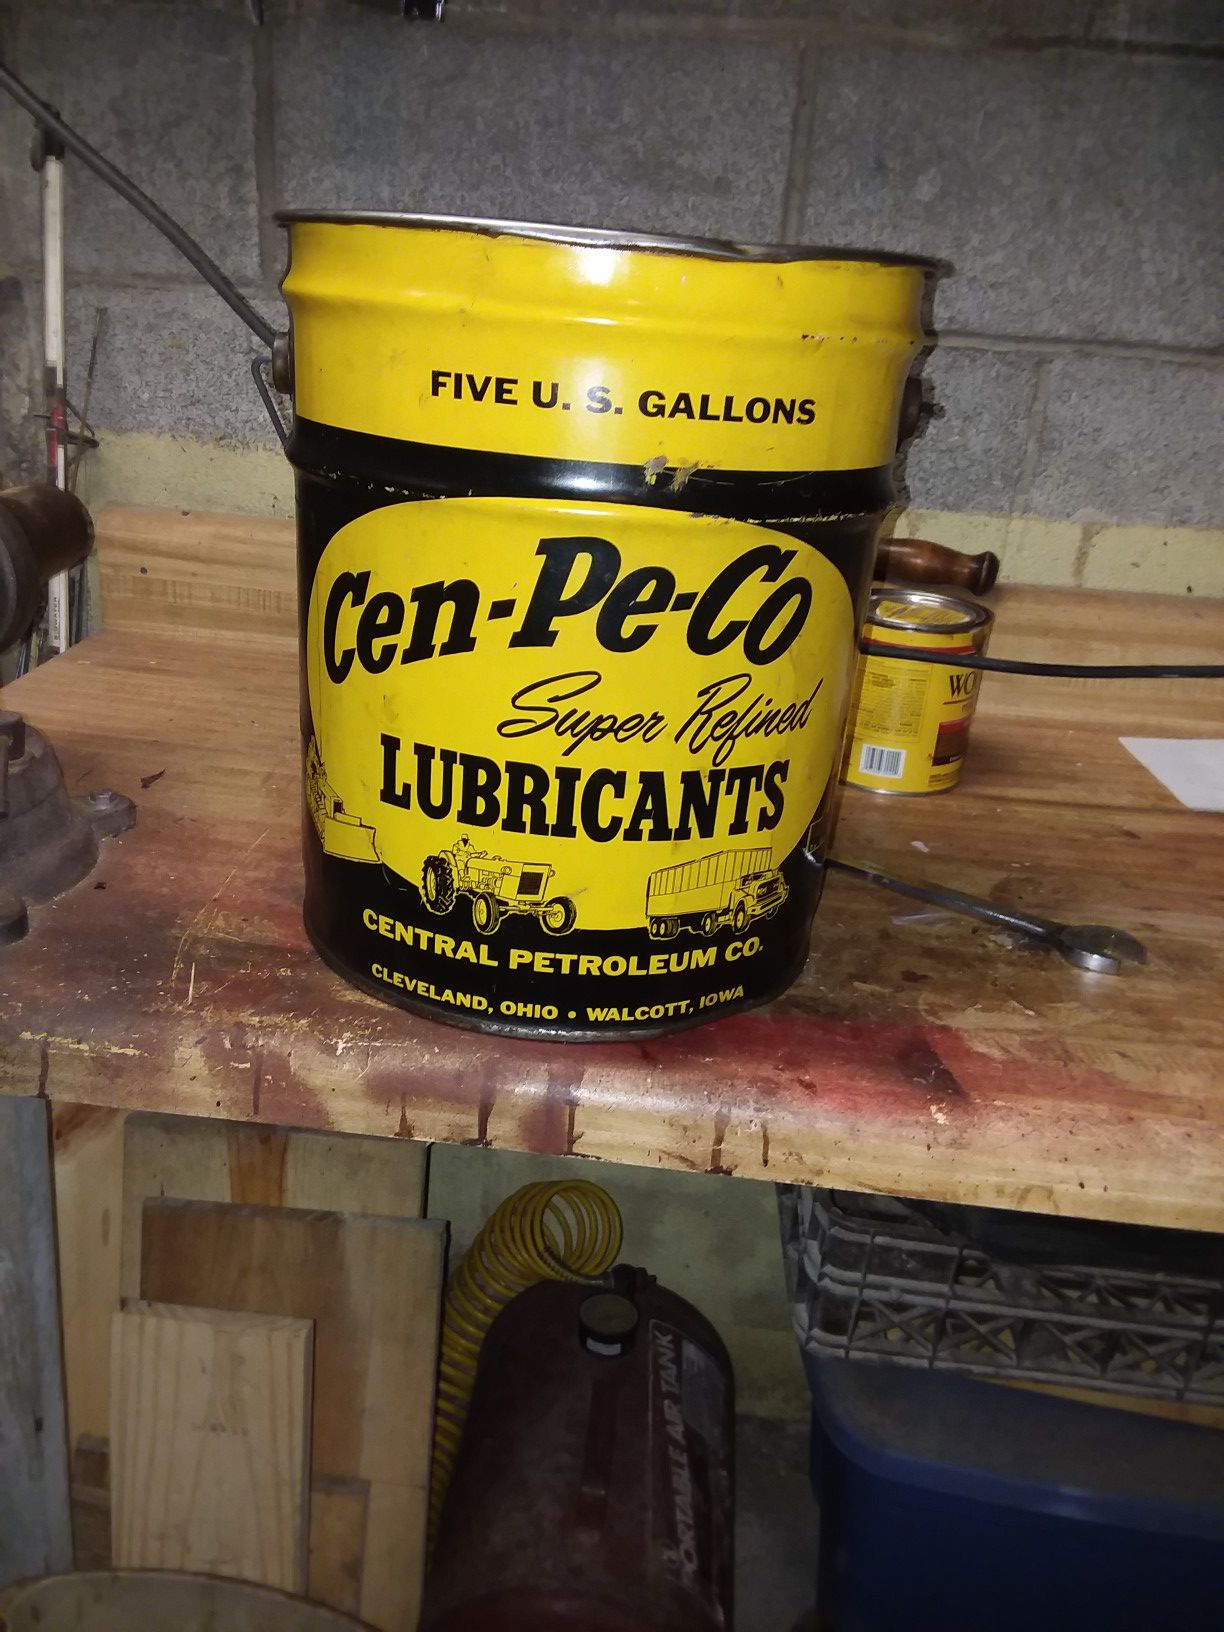 Cen pe co lubricant can